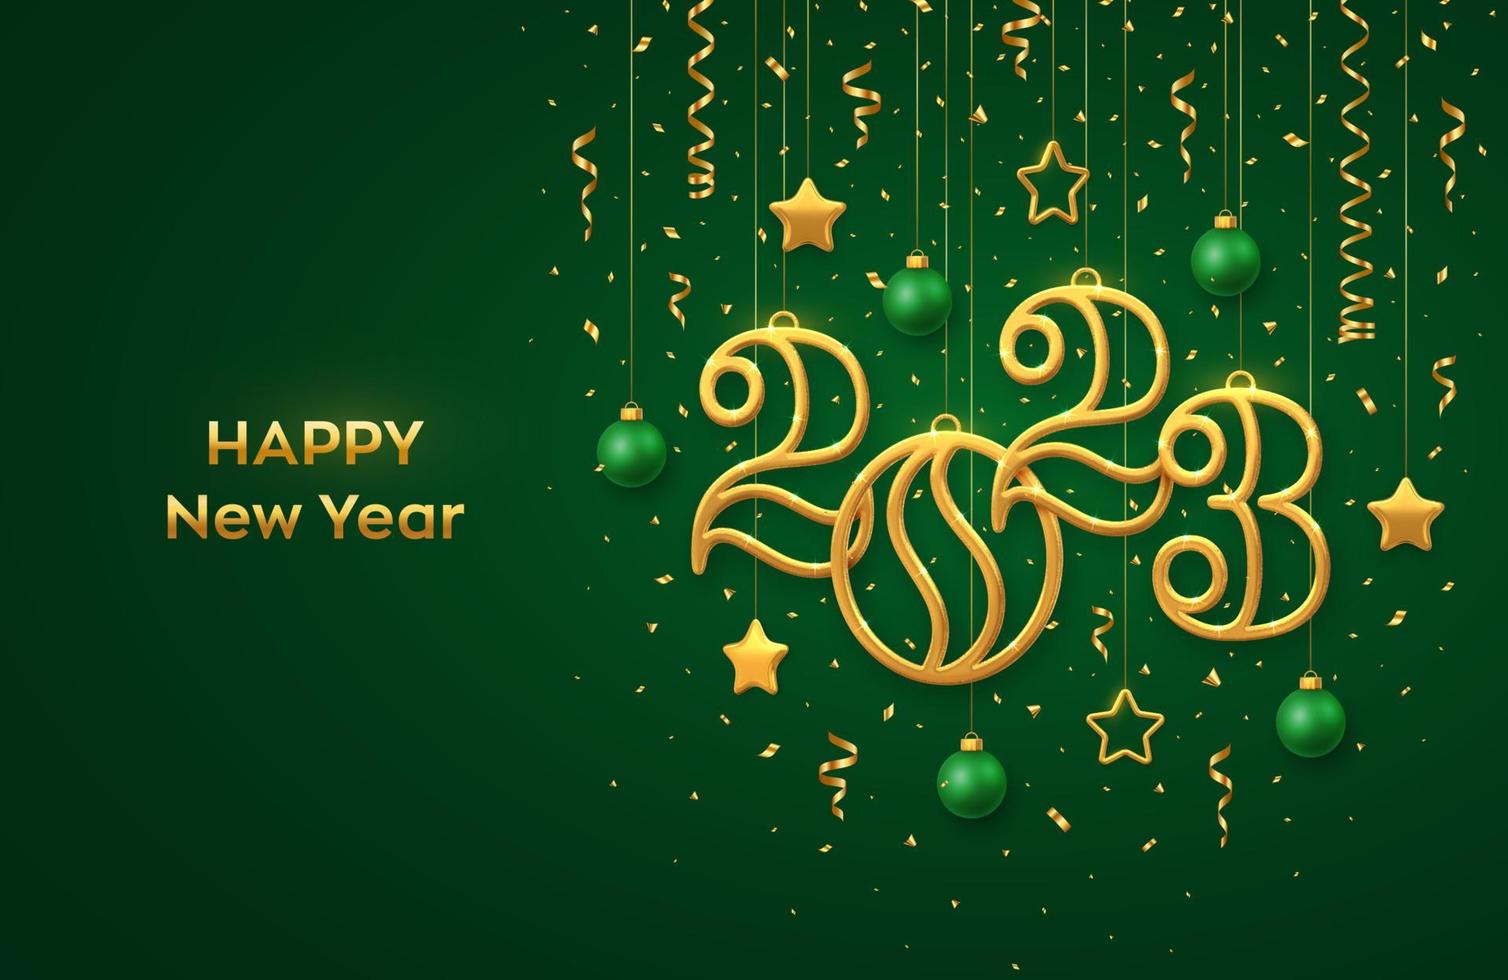 Happy New 2023 Year. Hanging Golden metallic numbers 2023 with shining 3D metallic stars, balls and confetti on green background. New Year greeting card, banner template. Realistic Vector illustration